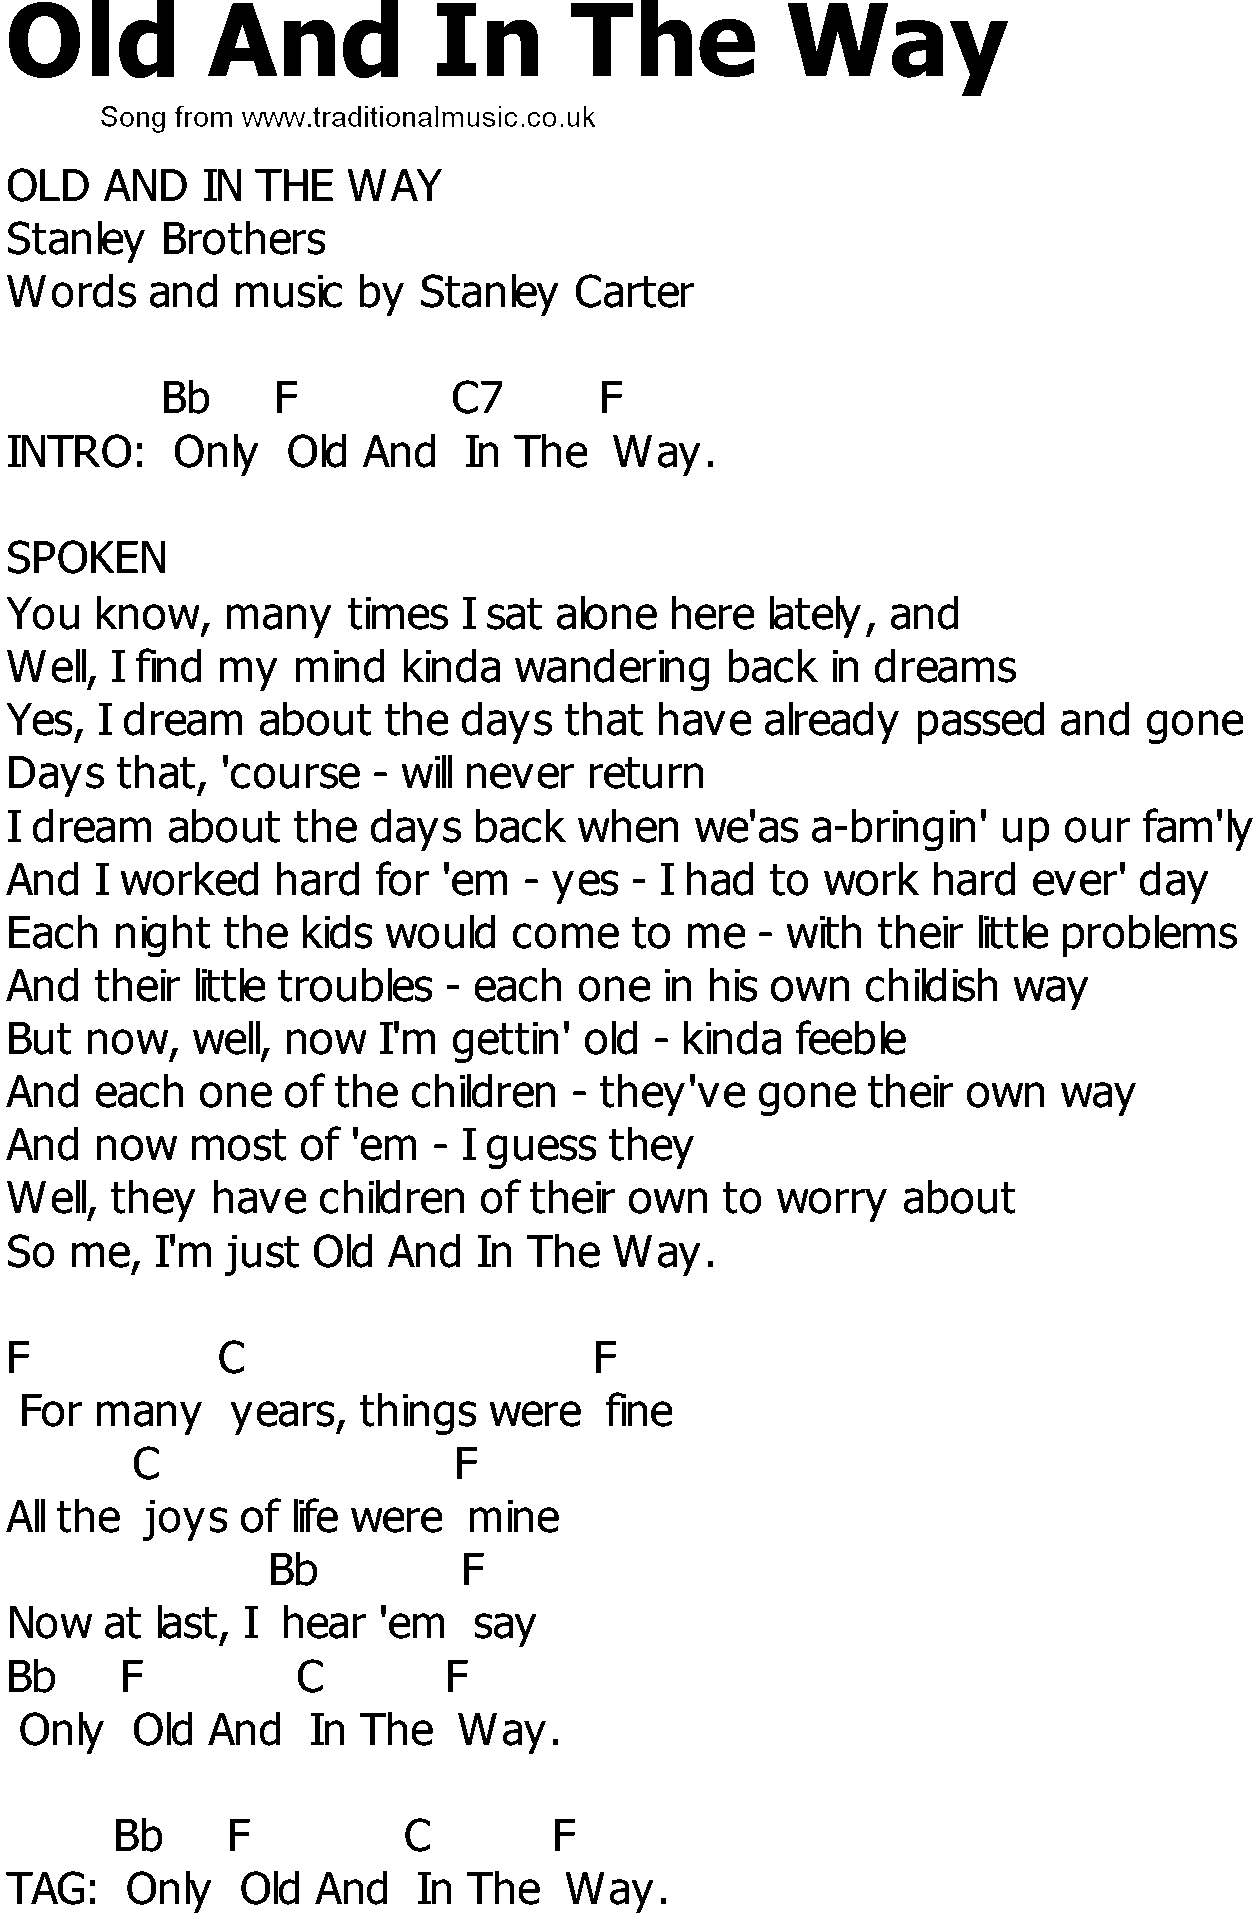 Old Country song lyrics with chords - Old And In The Way